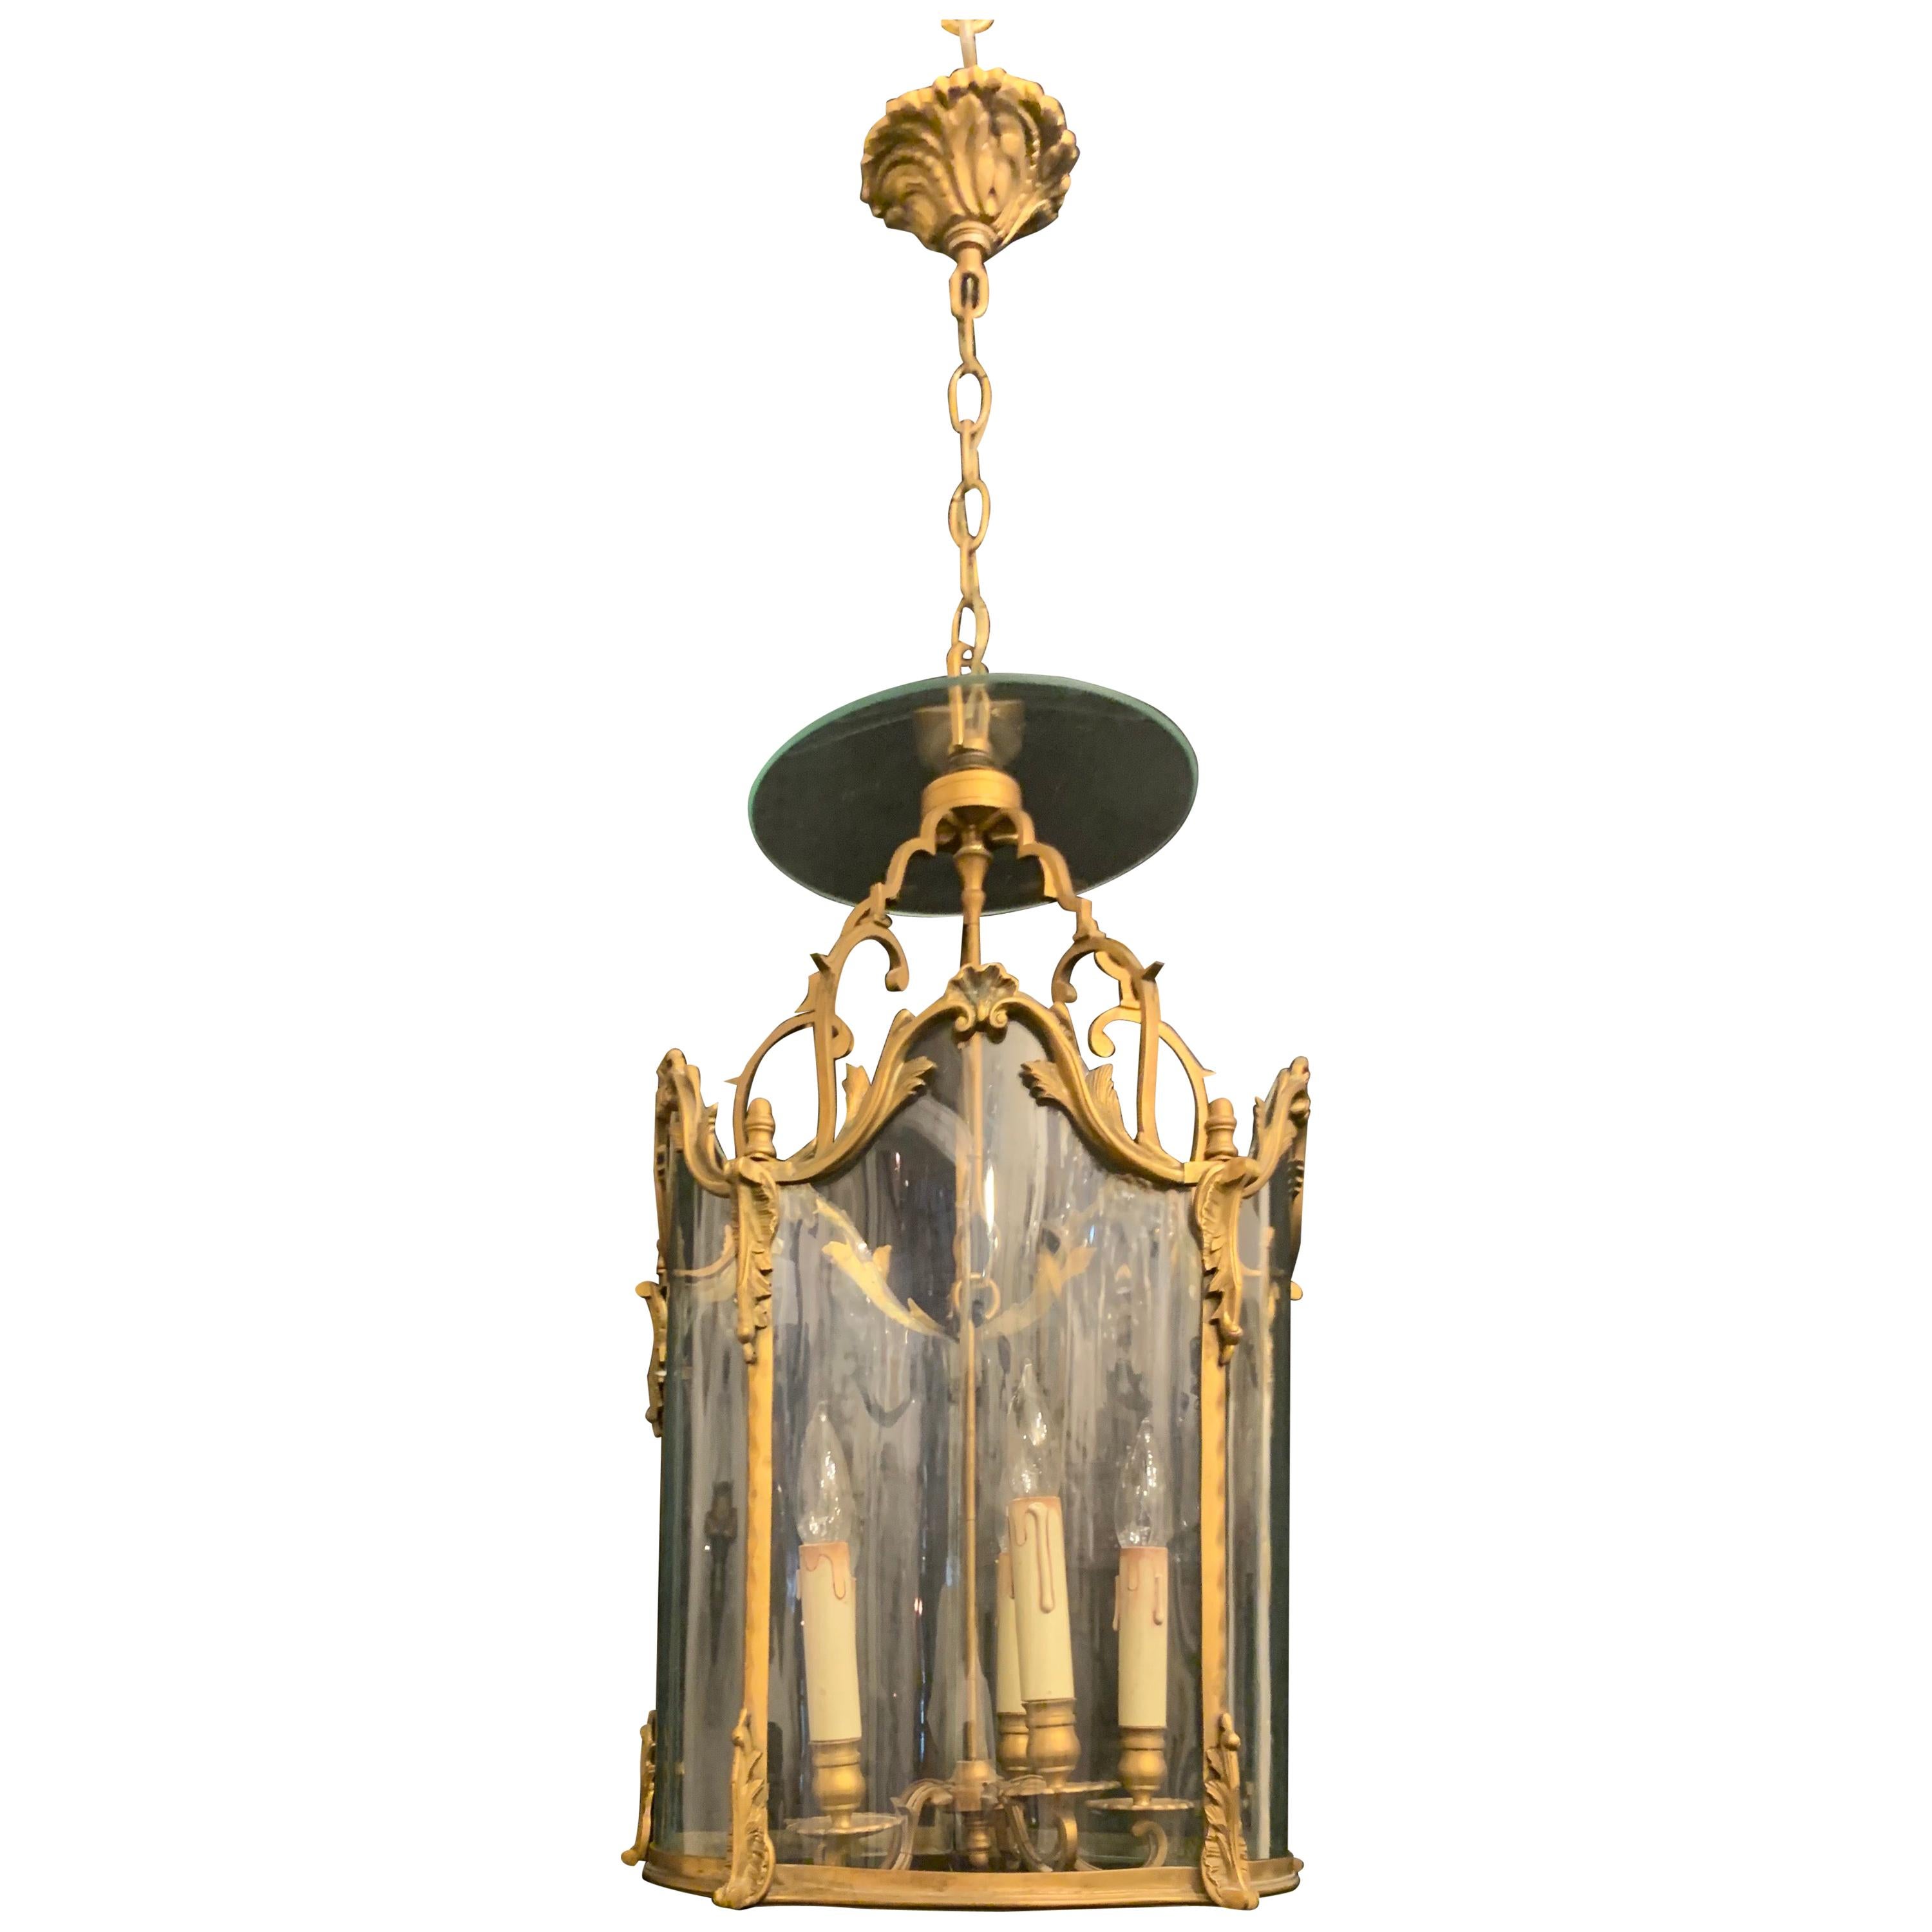 Wonderful French Louis XVI Gilt Bronze and Curved Panel Glass Lantern Fixture